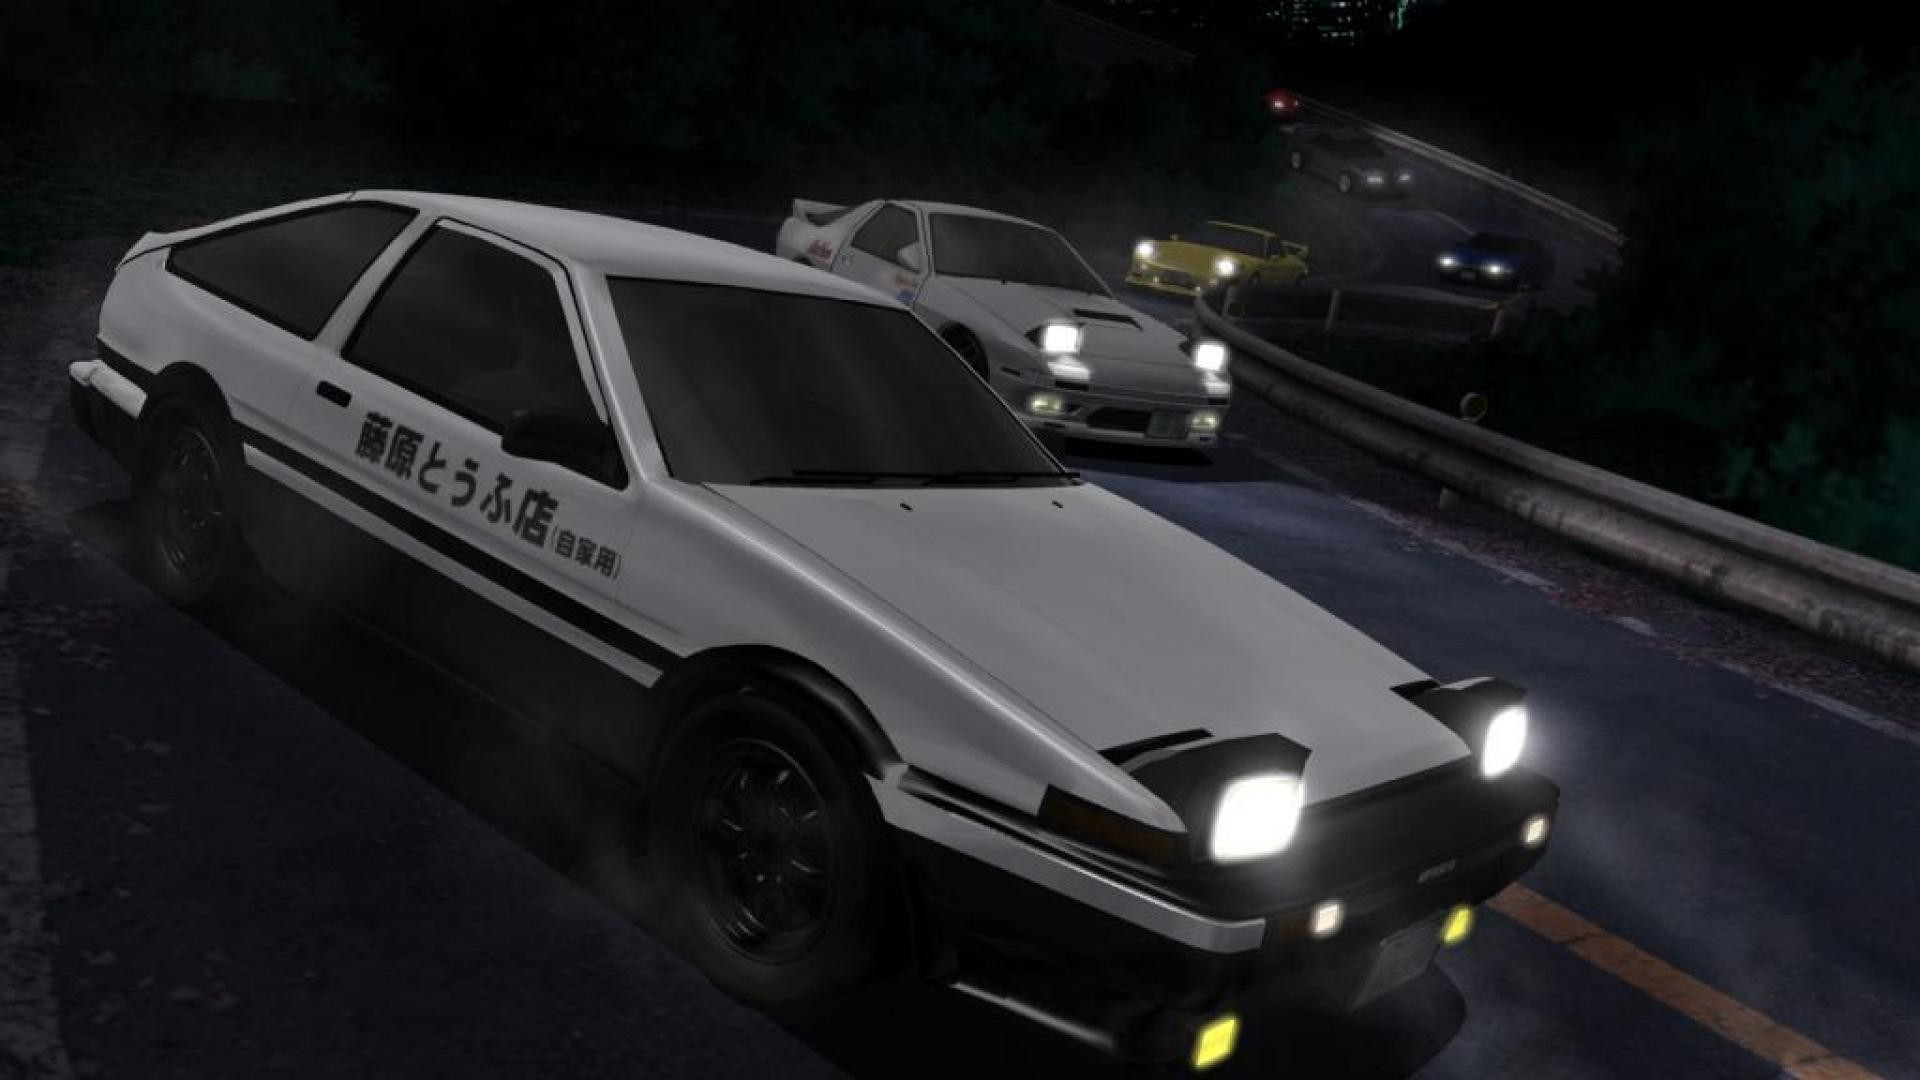 1920x1080 Initial D HD Wallpapers and Backgrounds | Beautiful Wallpapers | Pinterest  | Initials and Cars